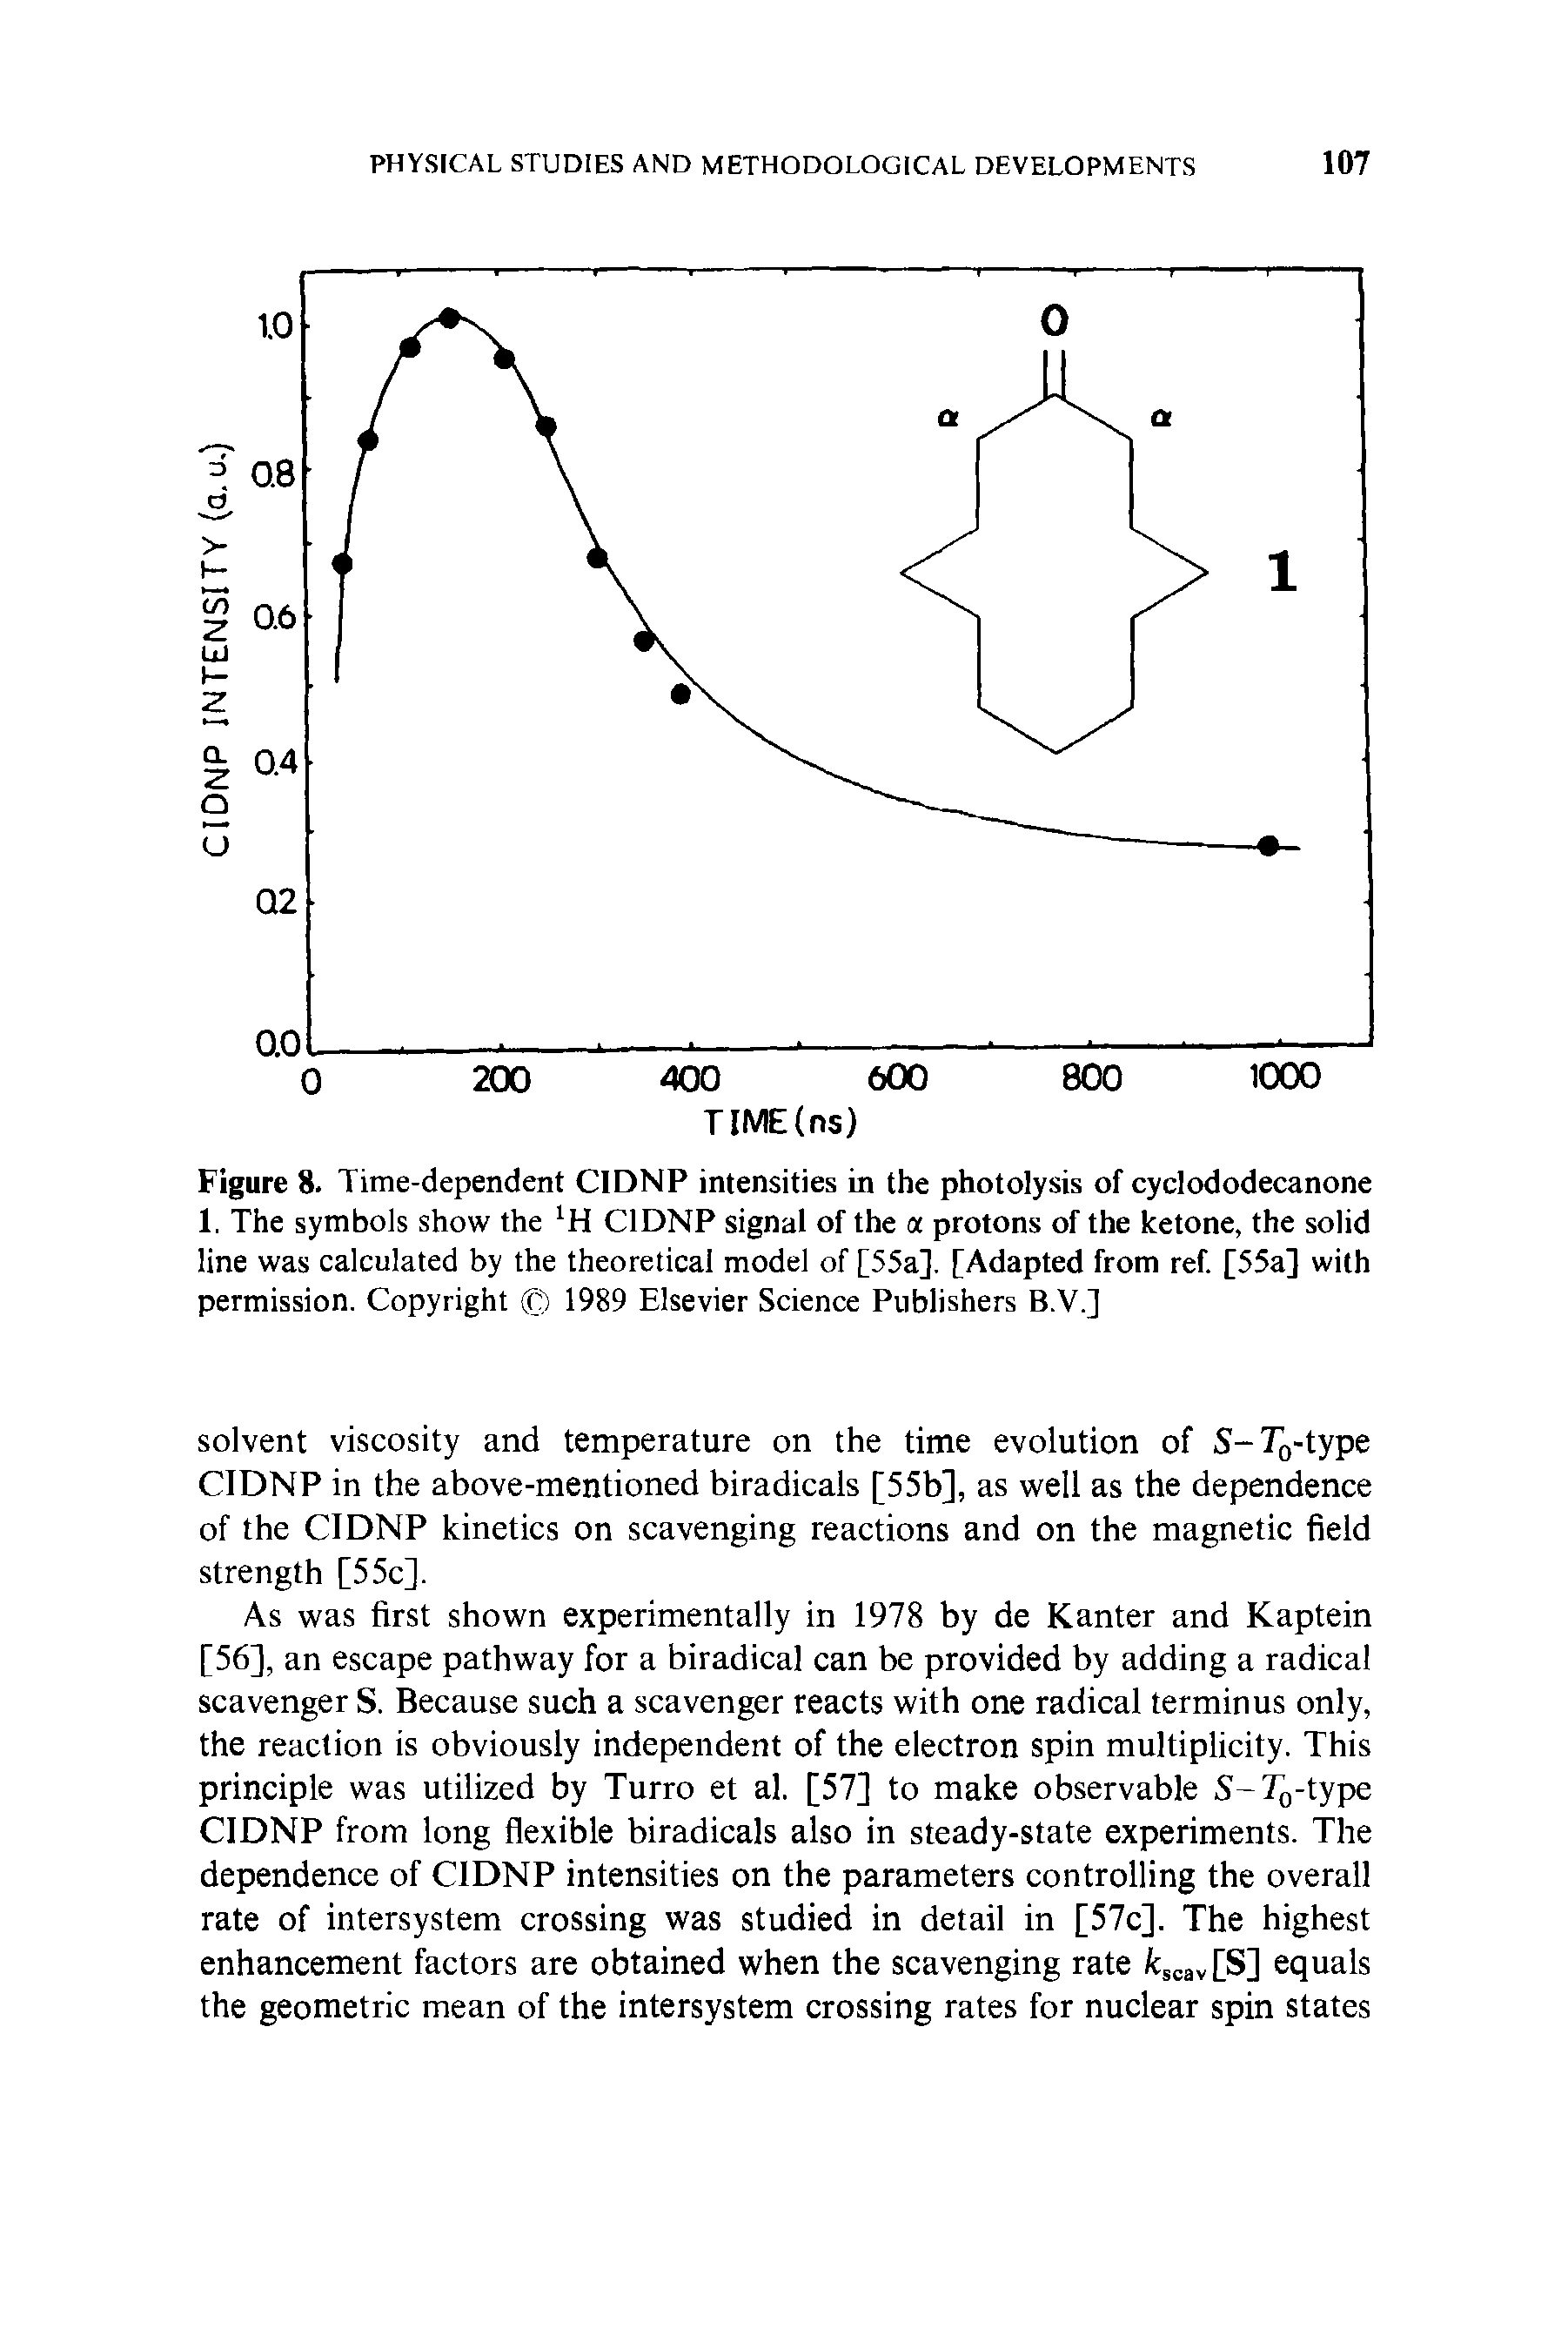 Figure 8. Time-dependent CIDNP intensities in the photolysis of cyclododecanone 1. The symbols show the H CIDNP signal of the a protons of the ketone, the solid line was calculated by the theoretical model of [55a], [Adapted from ref. [55a] with permission. Copyright 1989 Elsevier Science Publishers B.V.]...